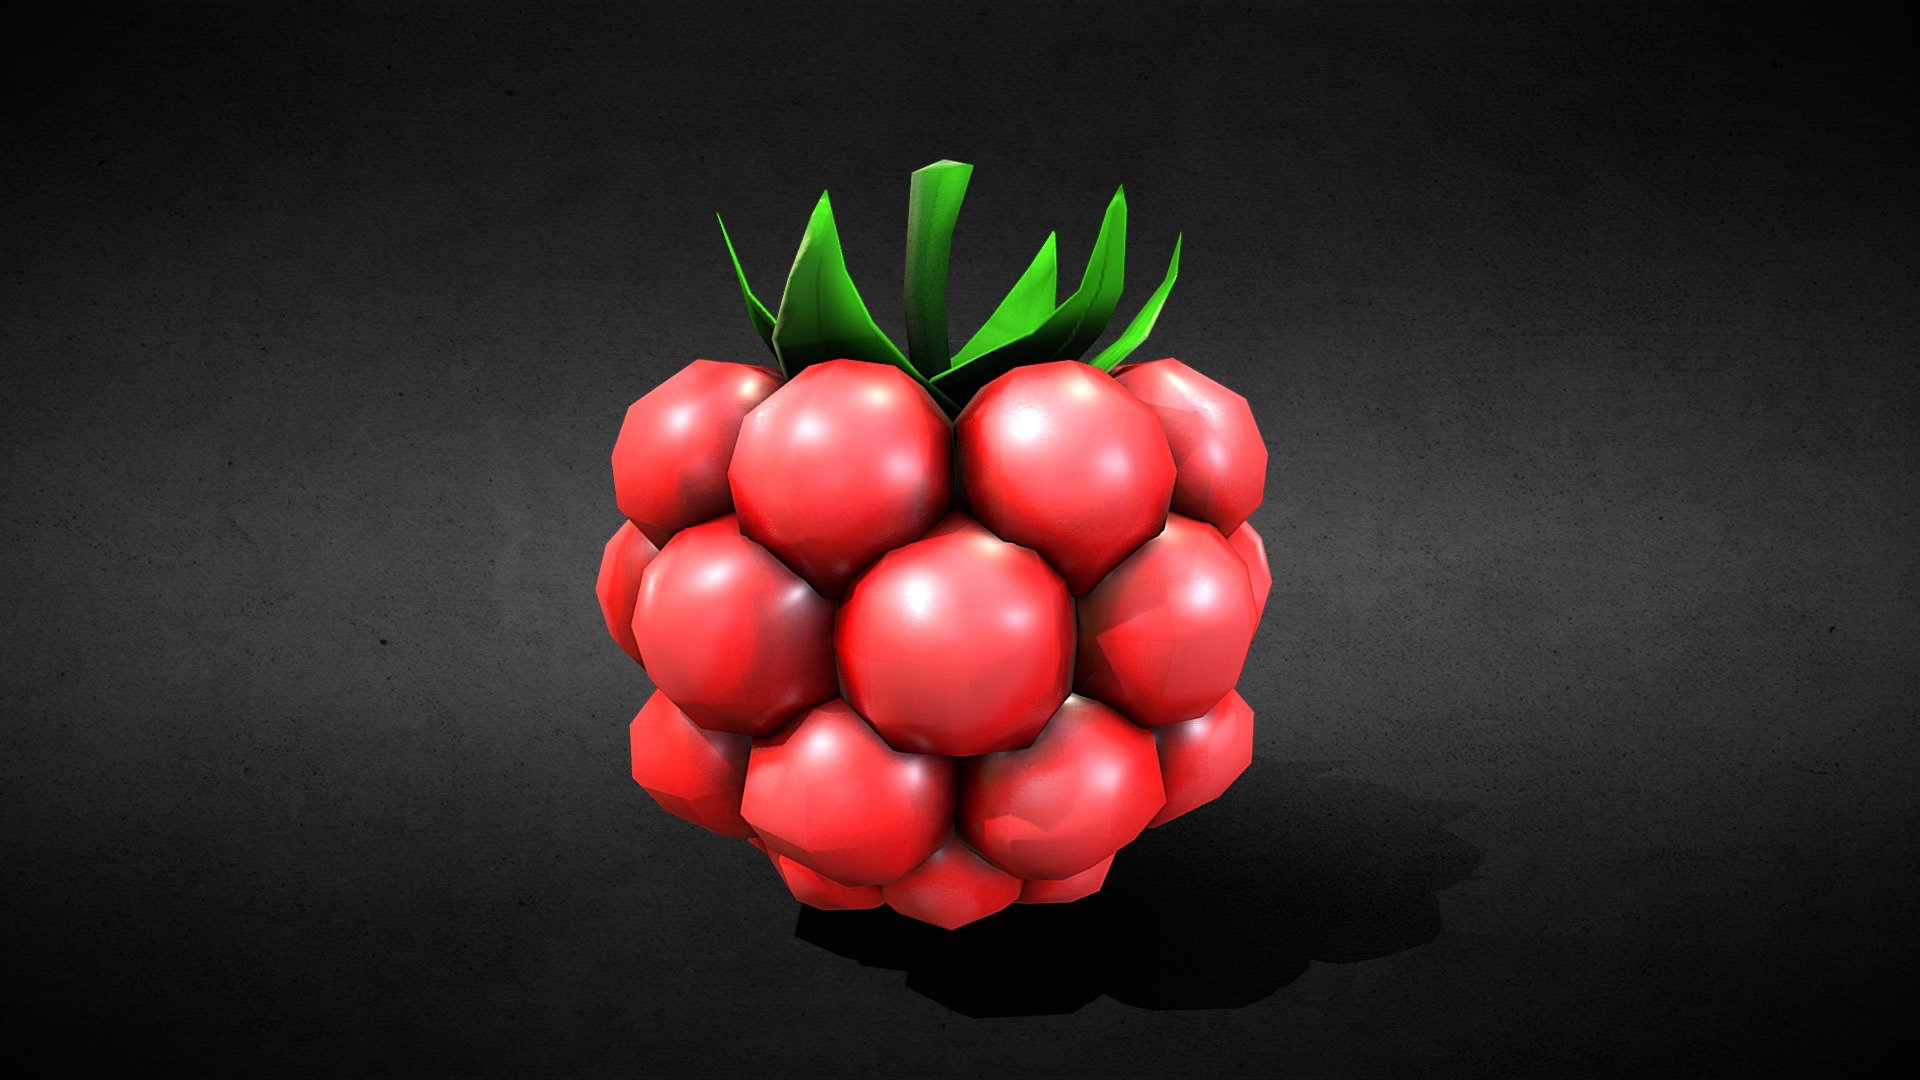 Magnetic Berry fruit,
Game ready 3d model.

Triangles: 2.7k
Vertices: 1.4k - Magnetic Berry - Buy Royalty Free 3D model by srikanthsamba 3d model